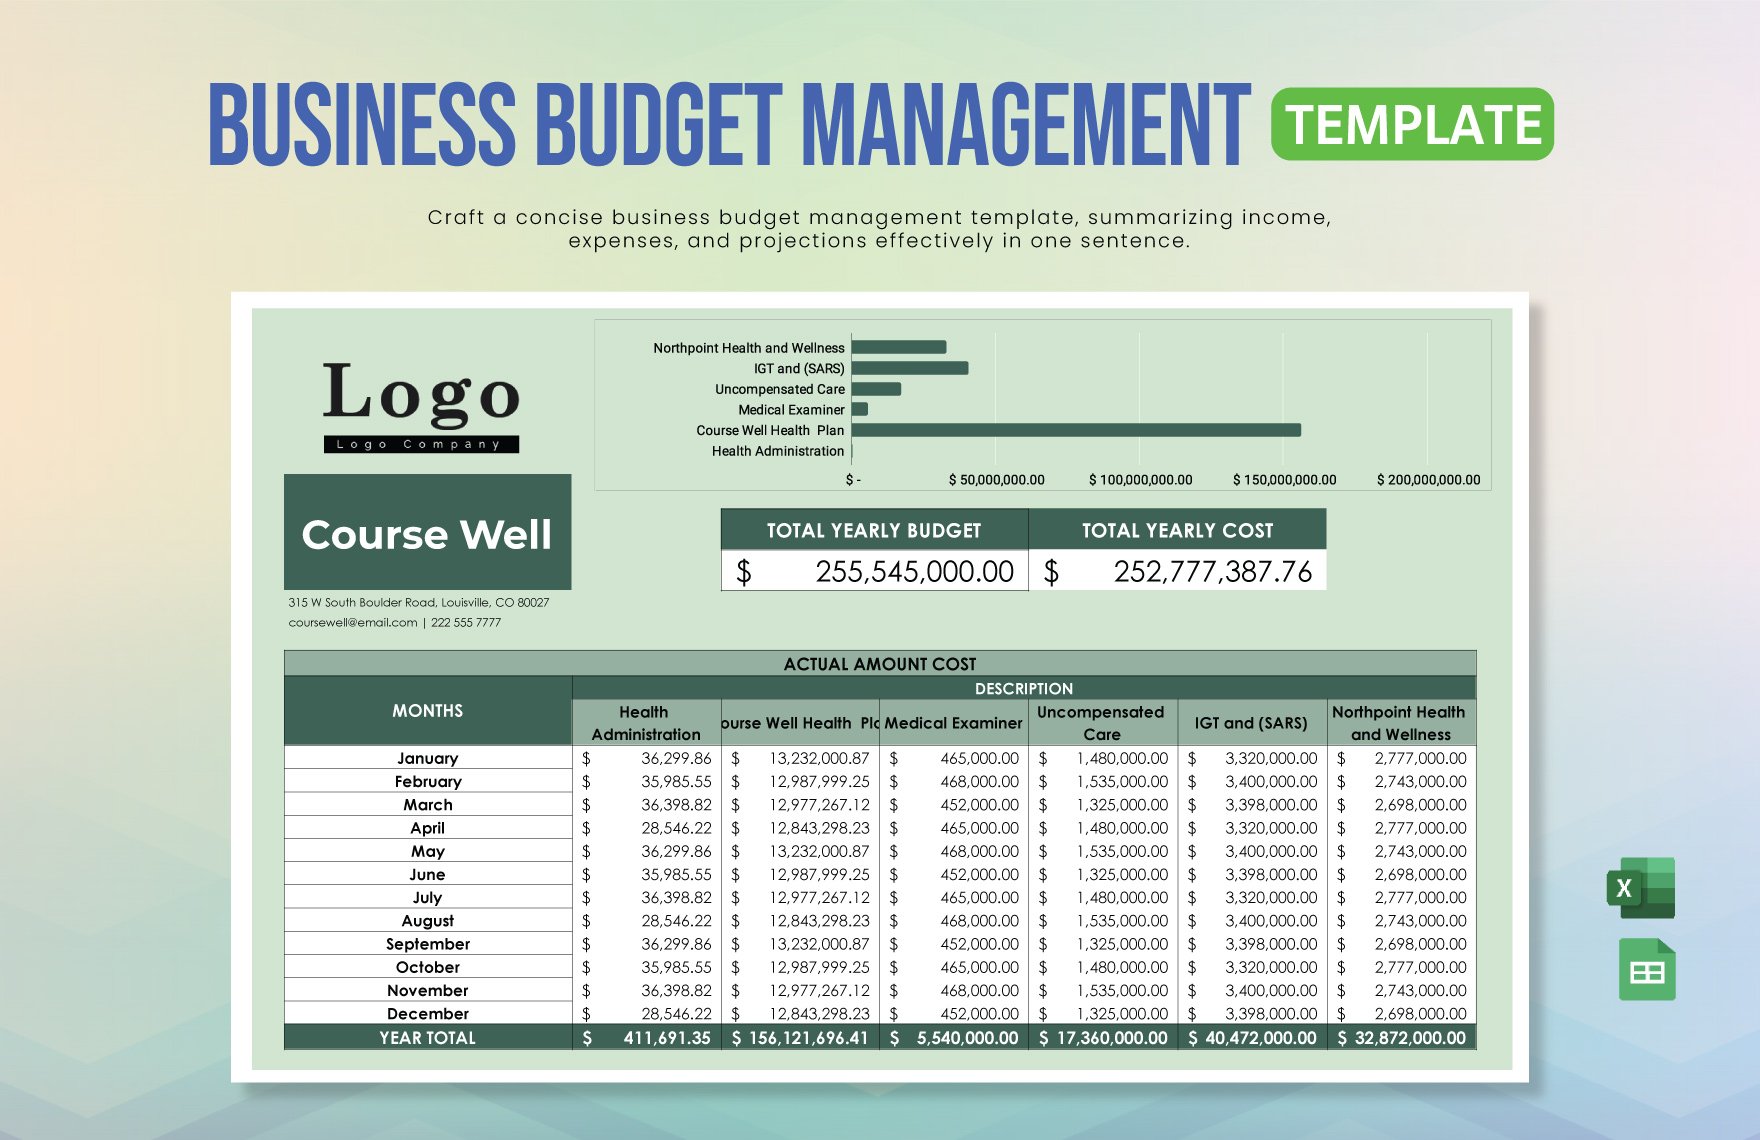 Business Budget Management Template in Excel, Google Sheets